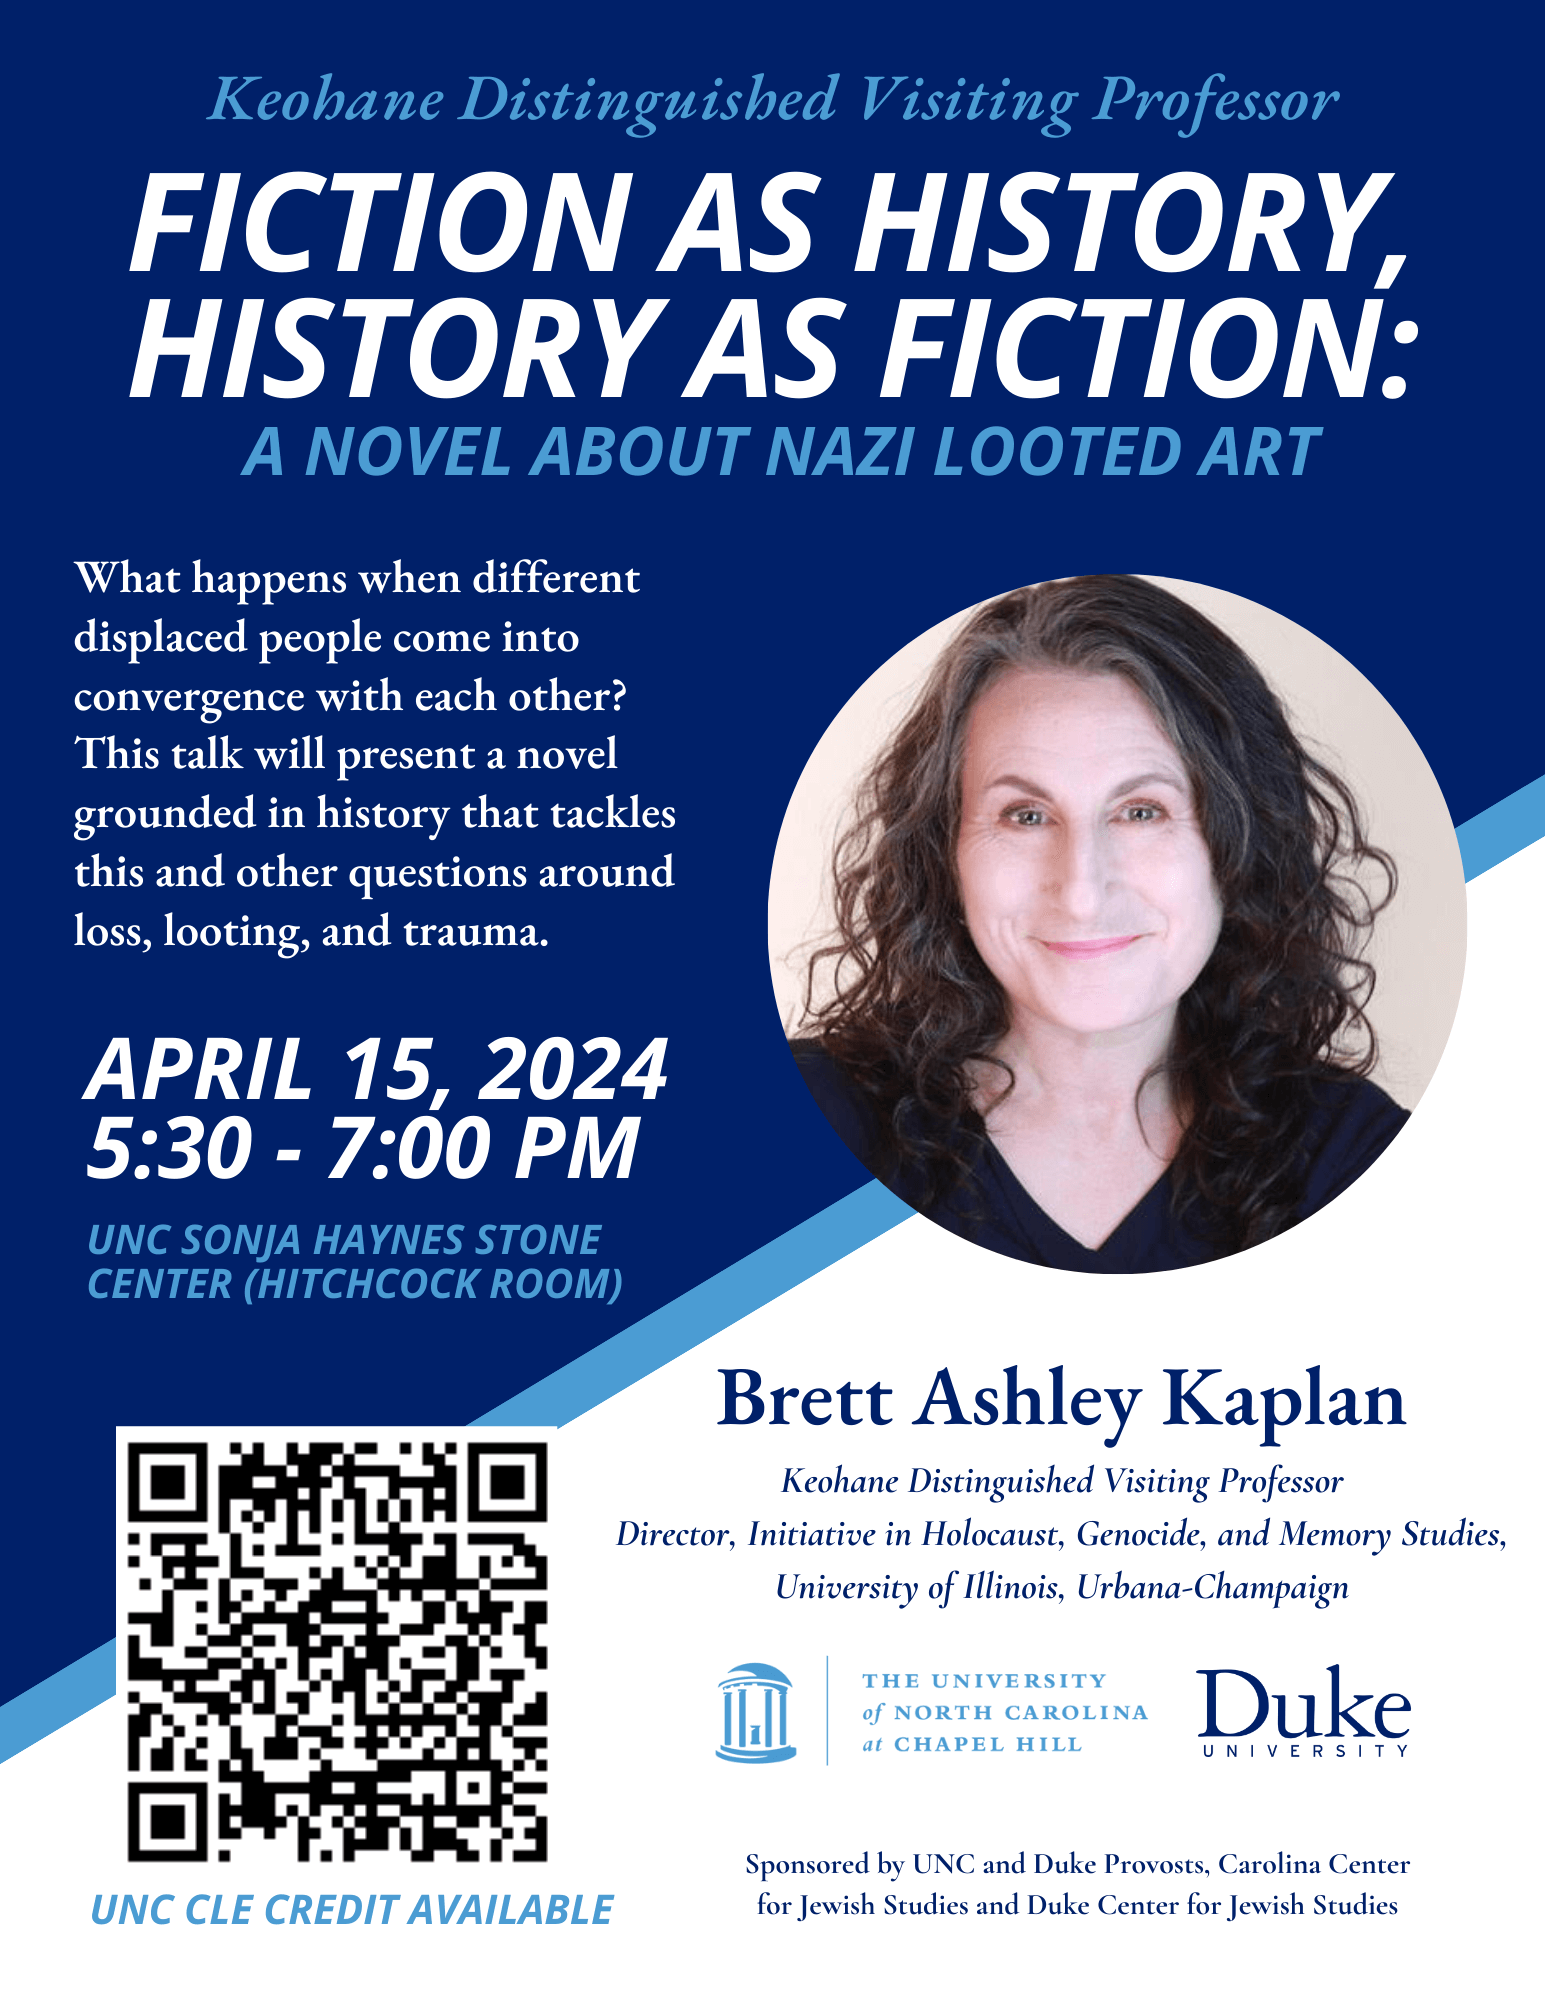 Flyer for April 15th "Fiction as History, History as Fiction" Keohane Distinguished Visiting Professor Talk